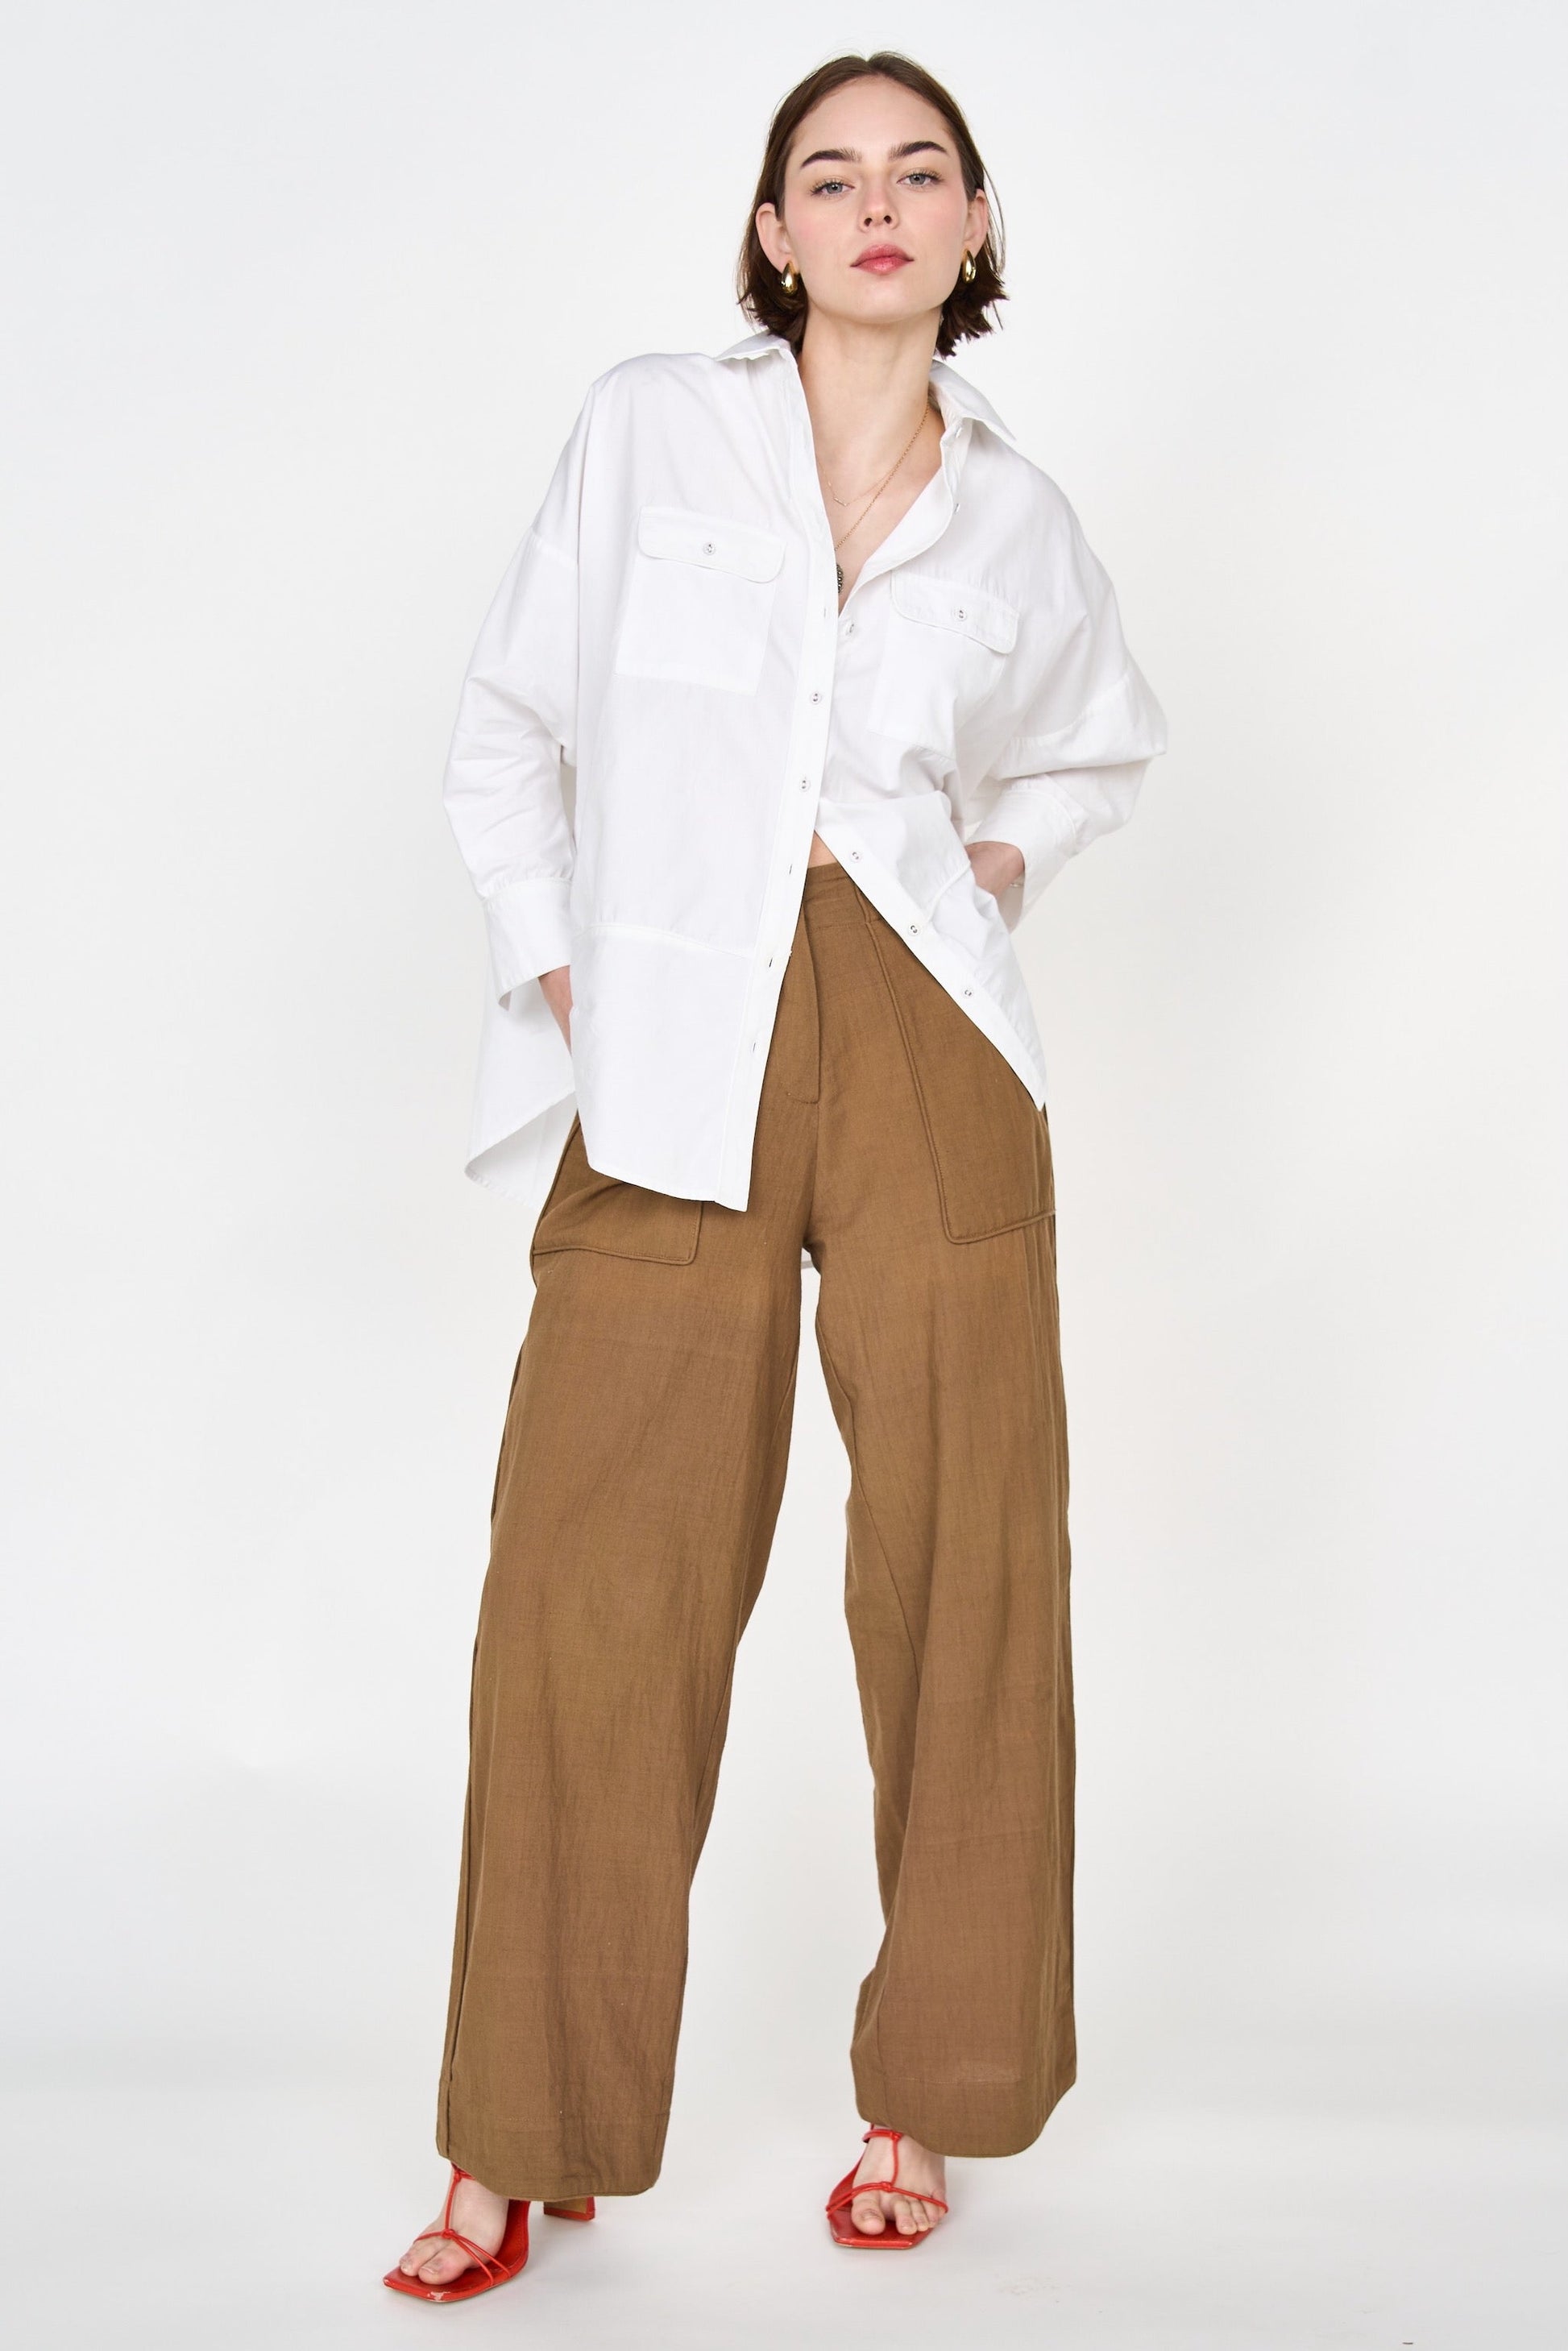 Mirth's best-selling tailored Tivot Pant is now available in a rich, new color for fall. The cotton fabric is hand loomed using hand spun yarns, giving it a textural feel. Ethically made in India.